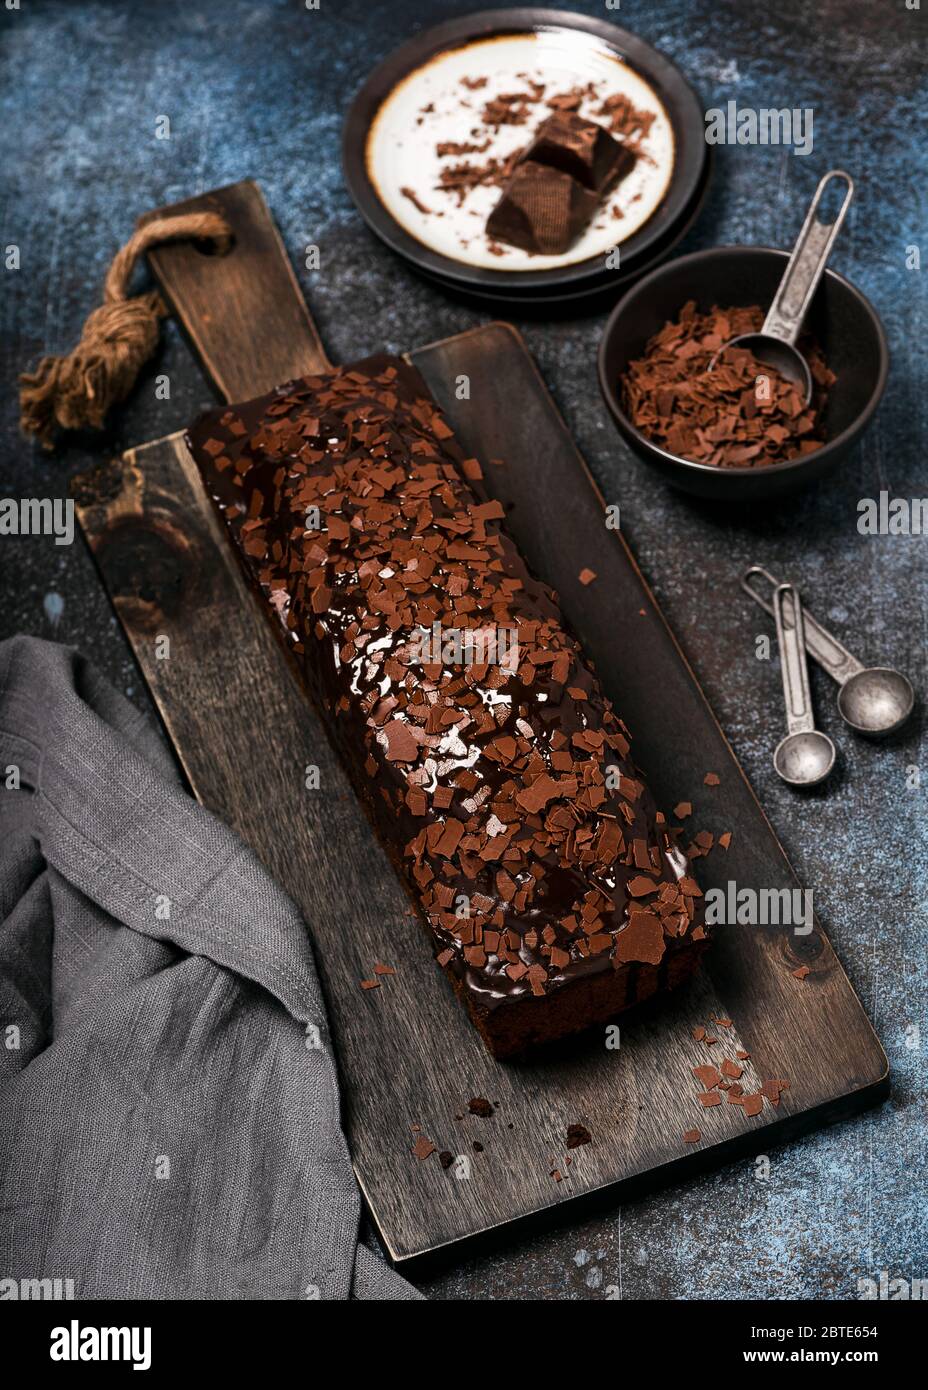 Delicious homemade chocolate cake with chips topping and glaze on rustic wooden cutting bread. Selective focus. Stock Photo